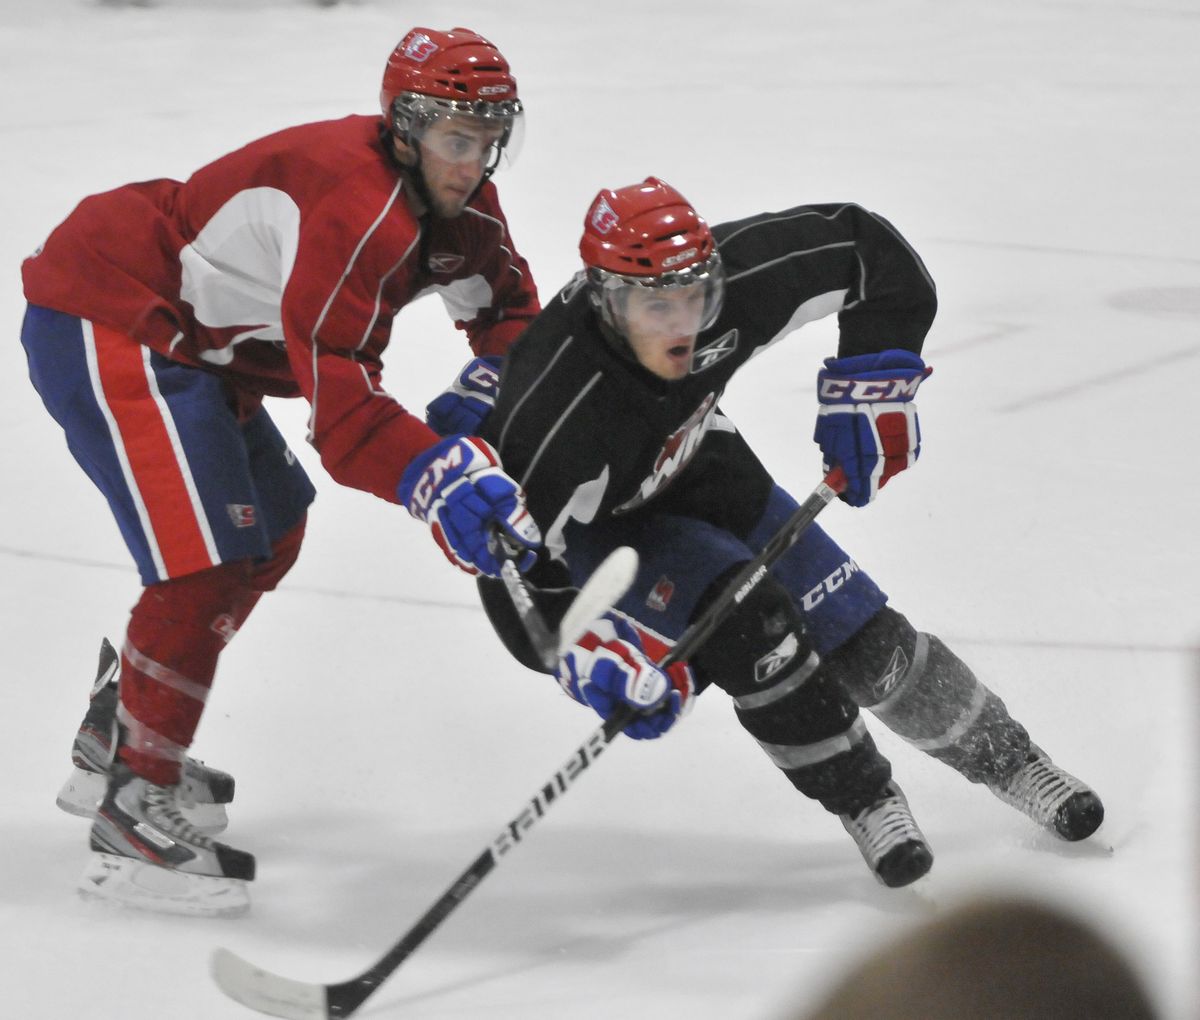 Defenseman Brenden Kichton, right, had a breakout season for the Spokane Chiefs last year with 23 goals and 58 assists. (Jesse Tinsley)